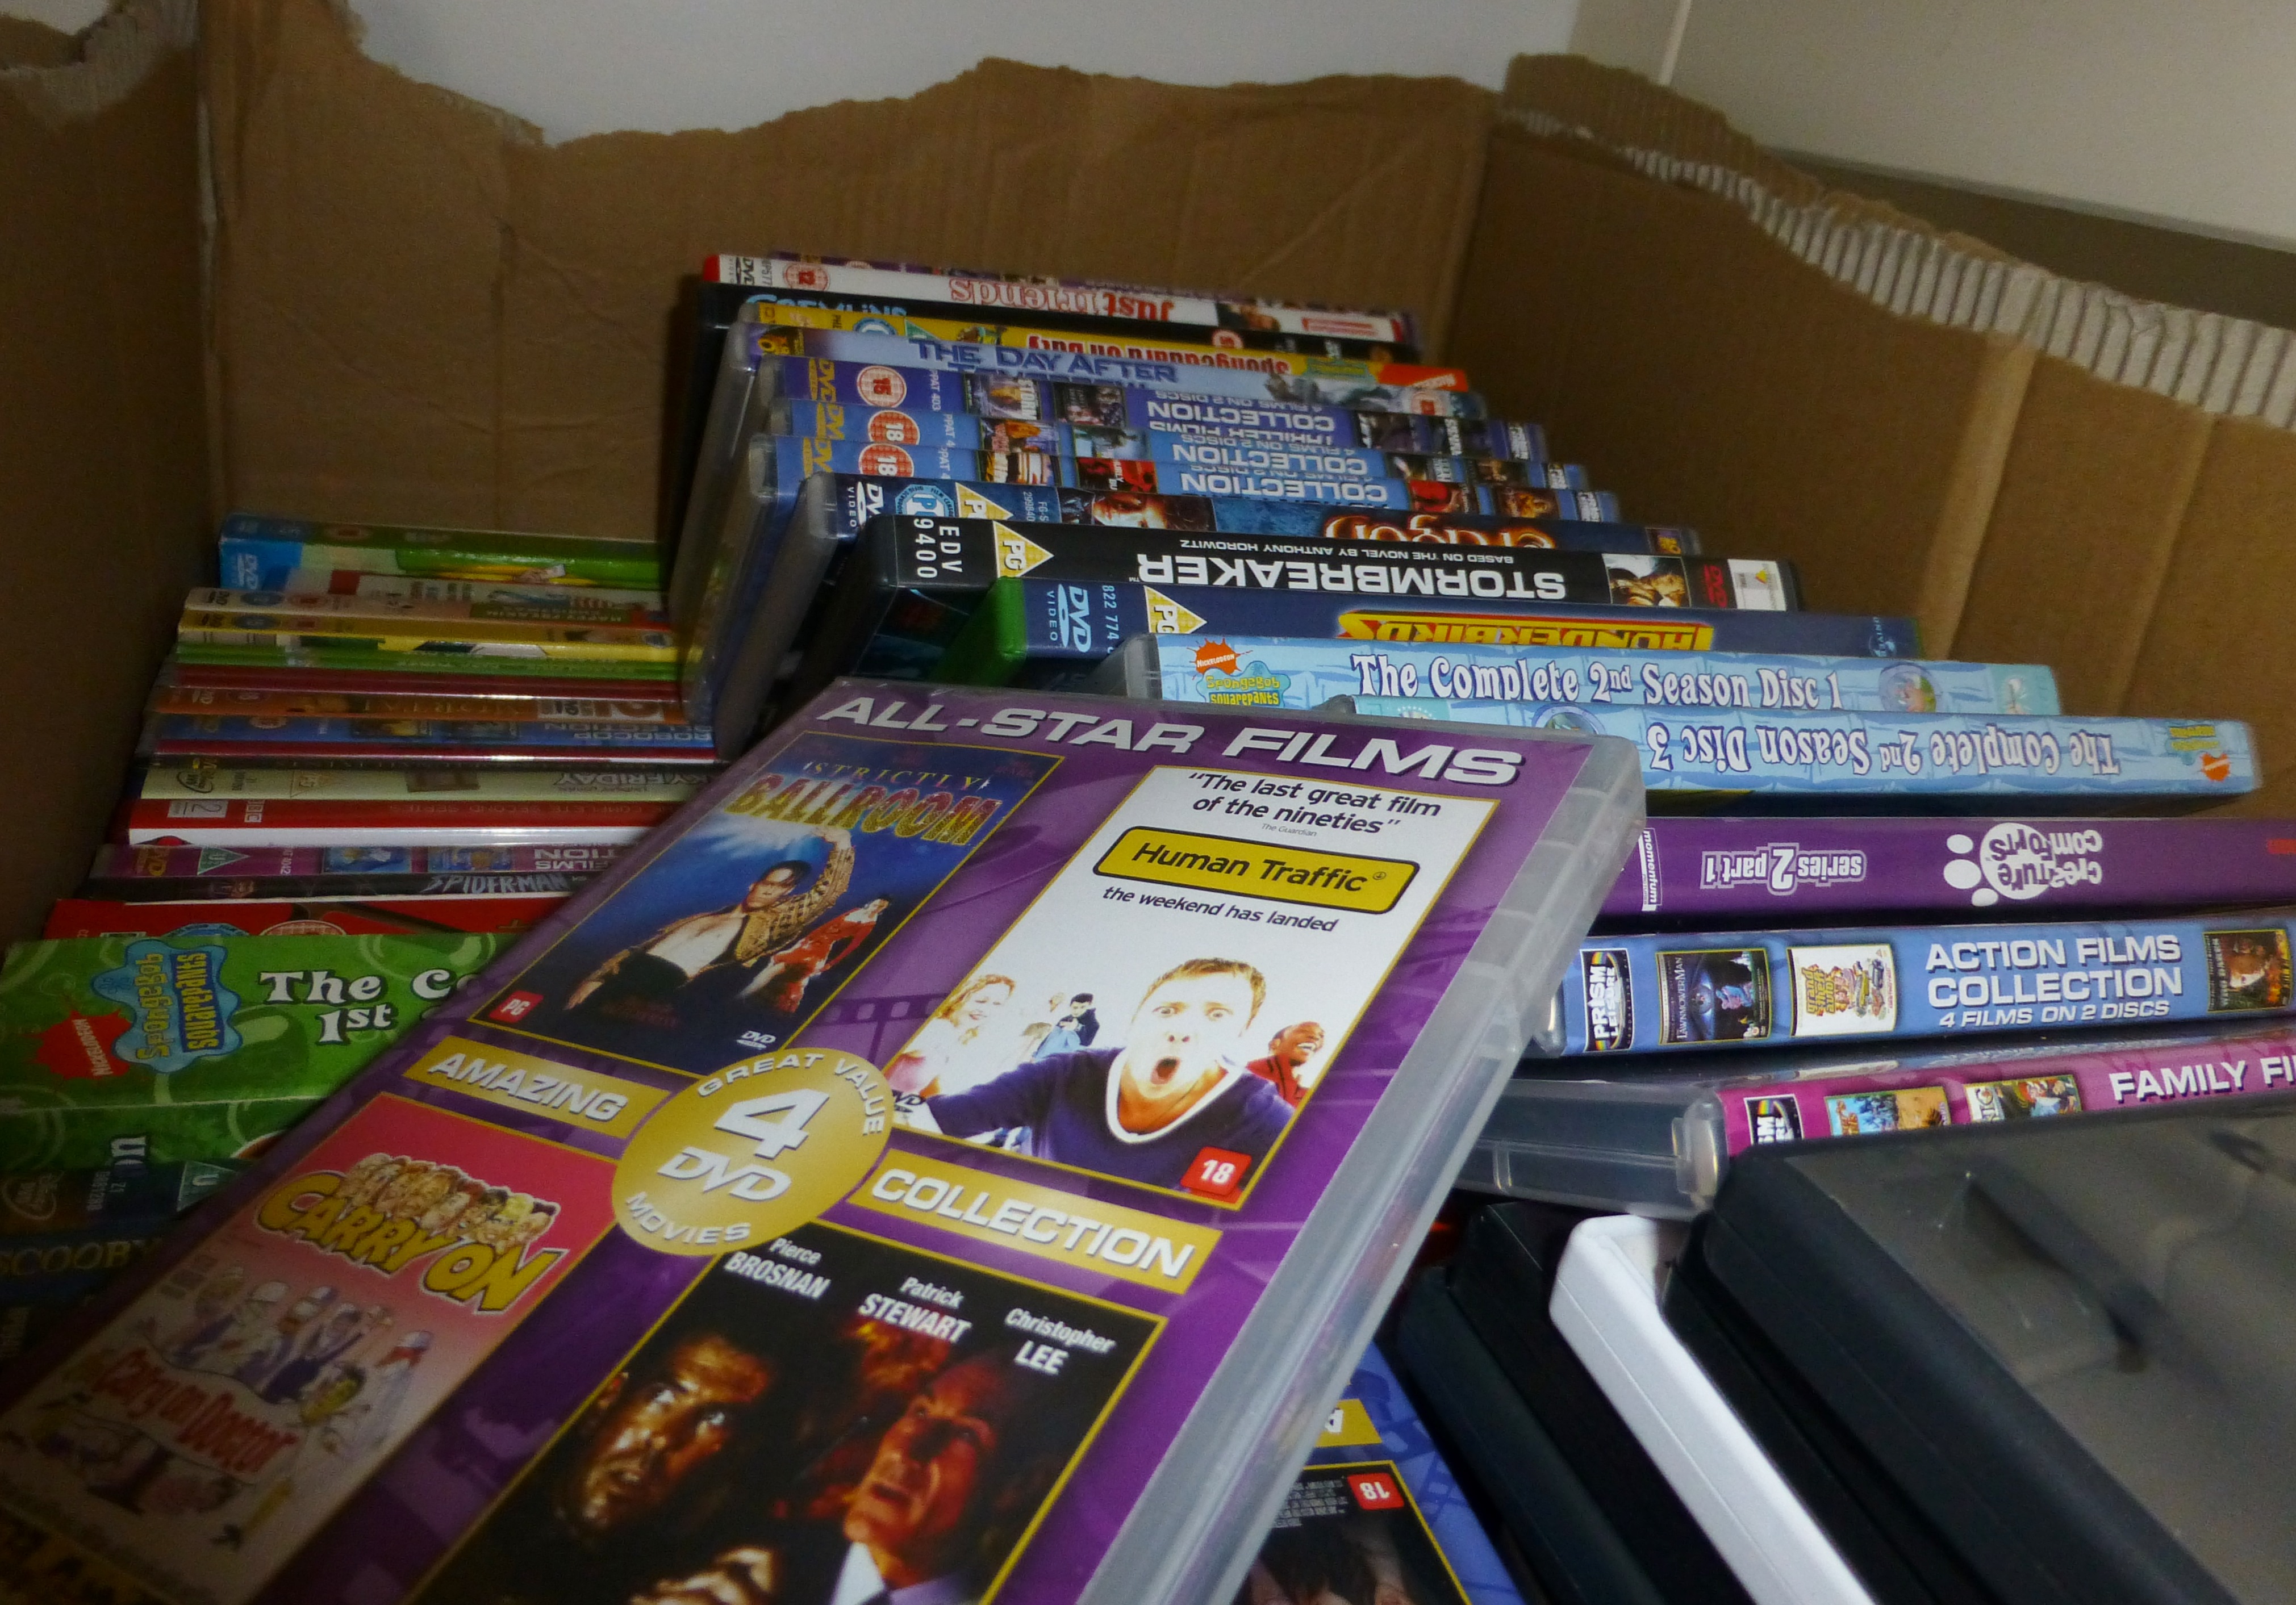 Large box of mixed DVDs